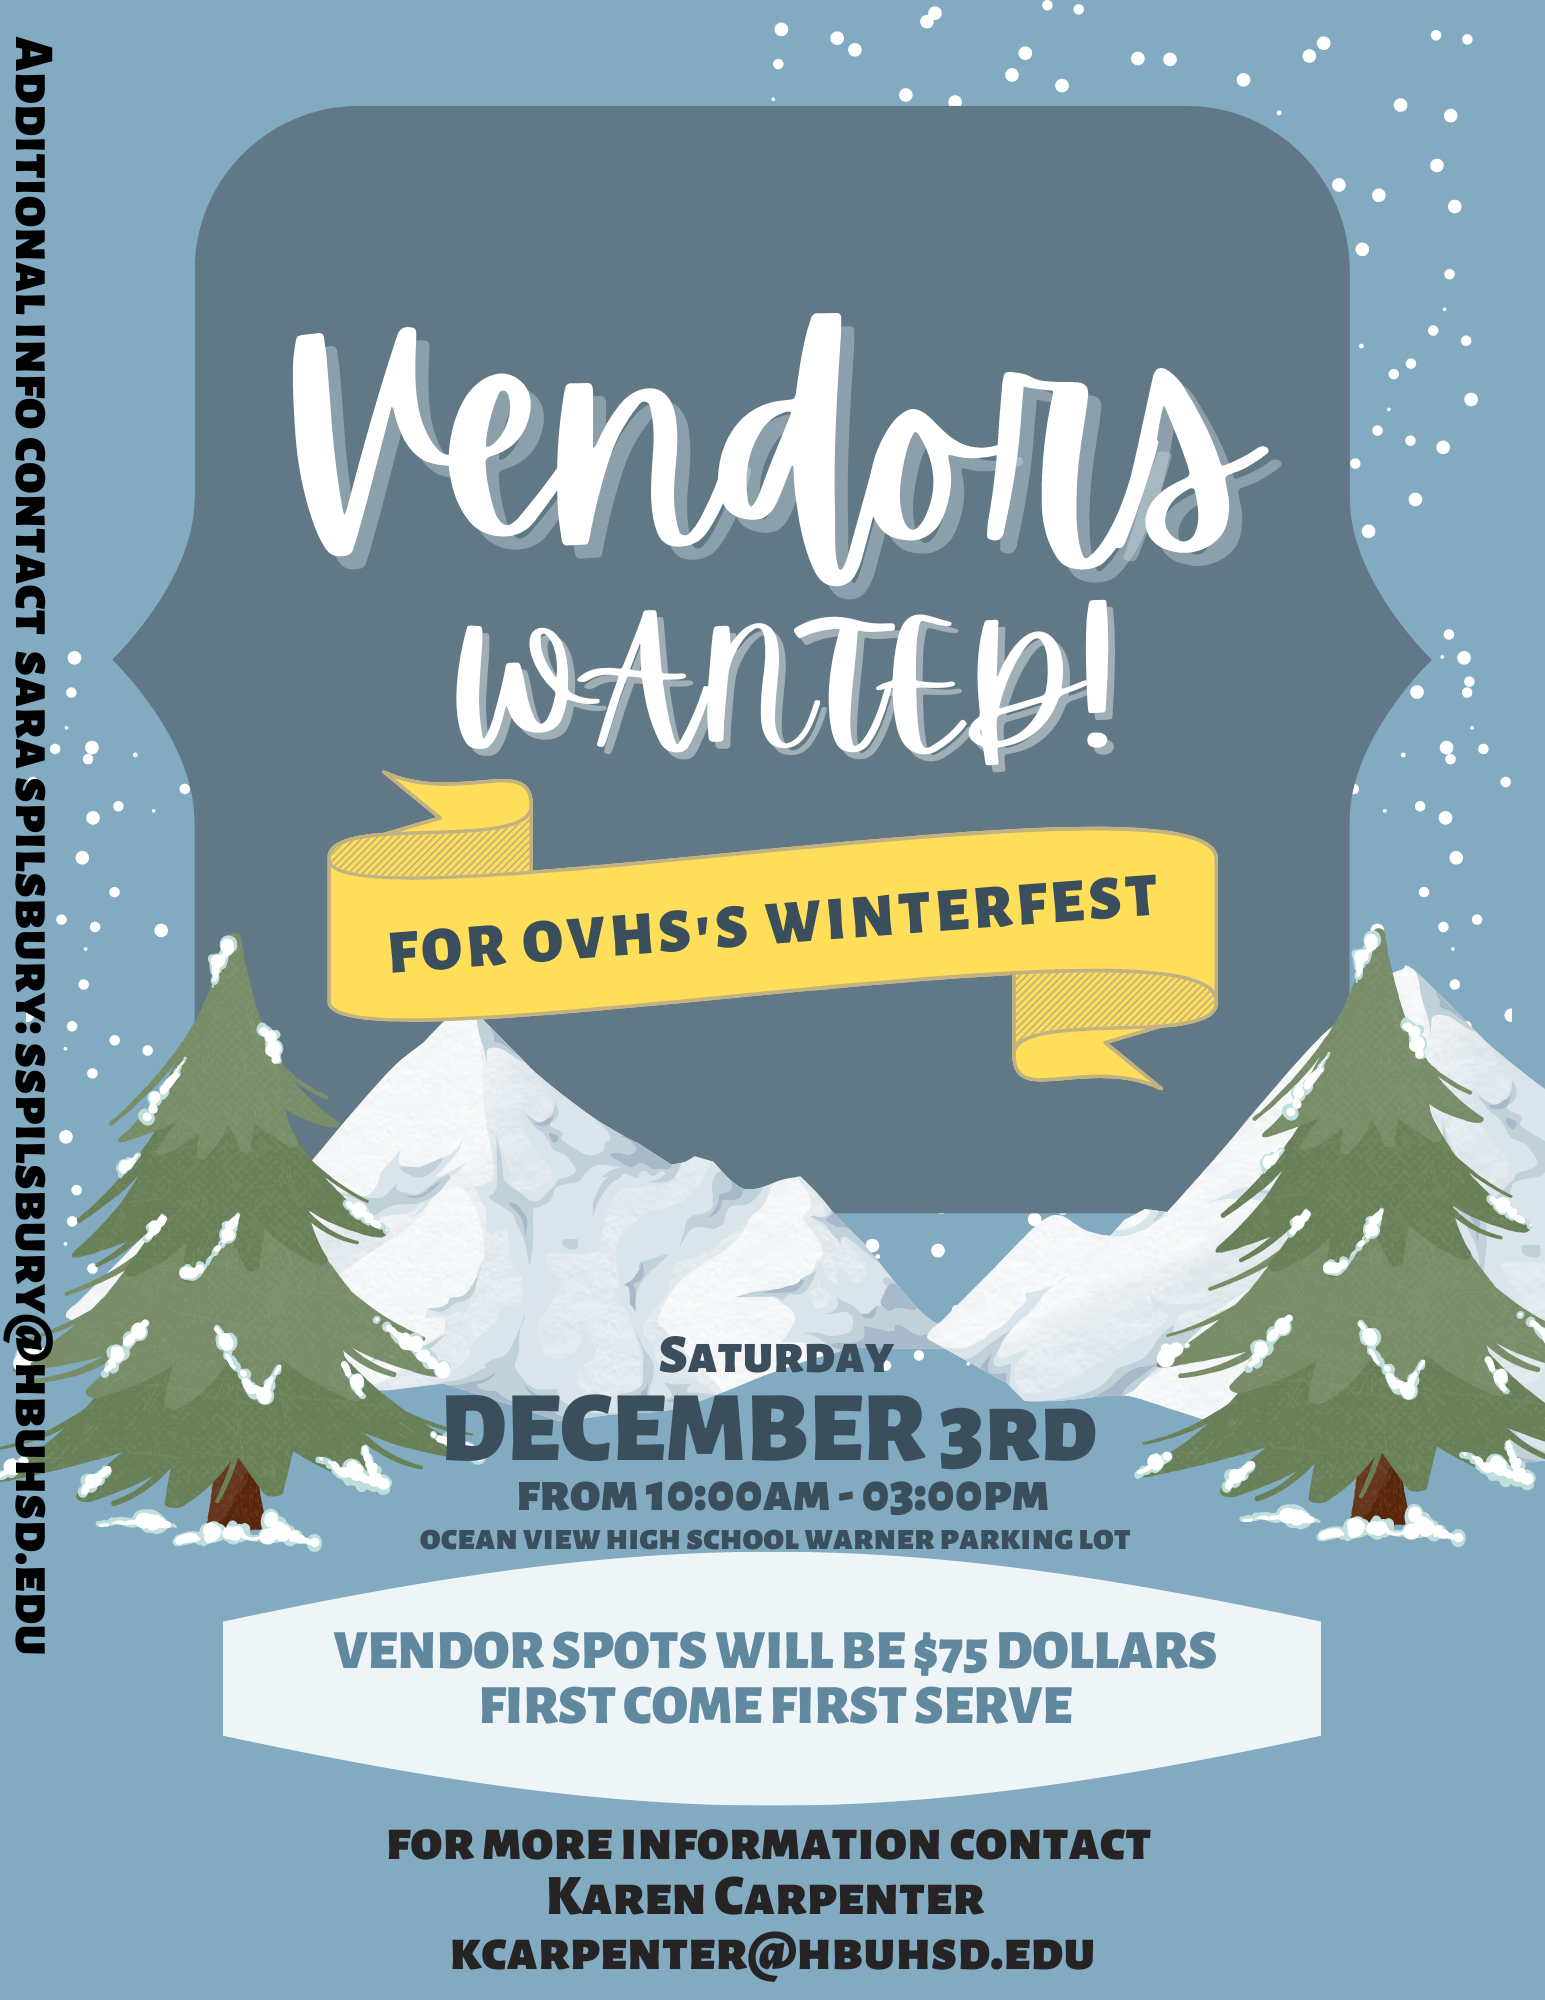 OVHS Vendors Needed